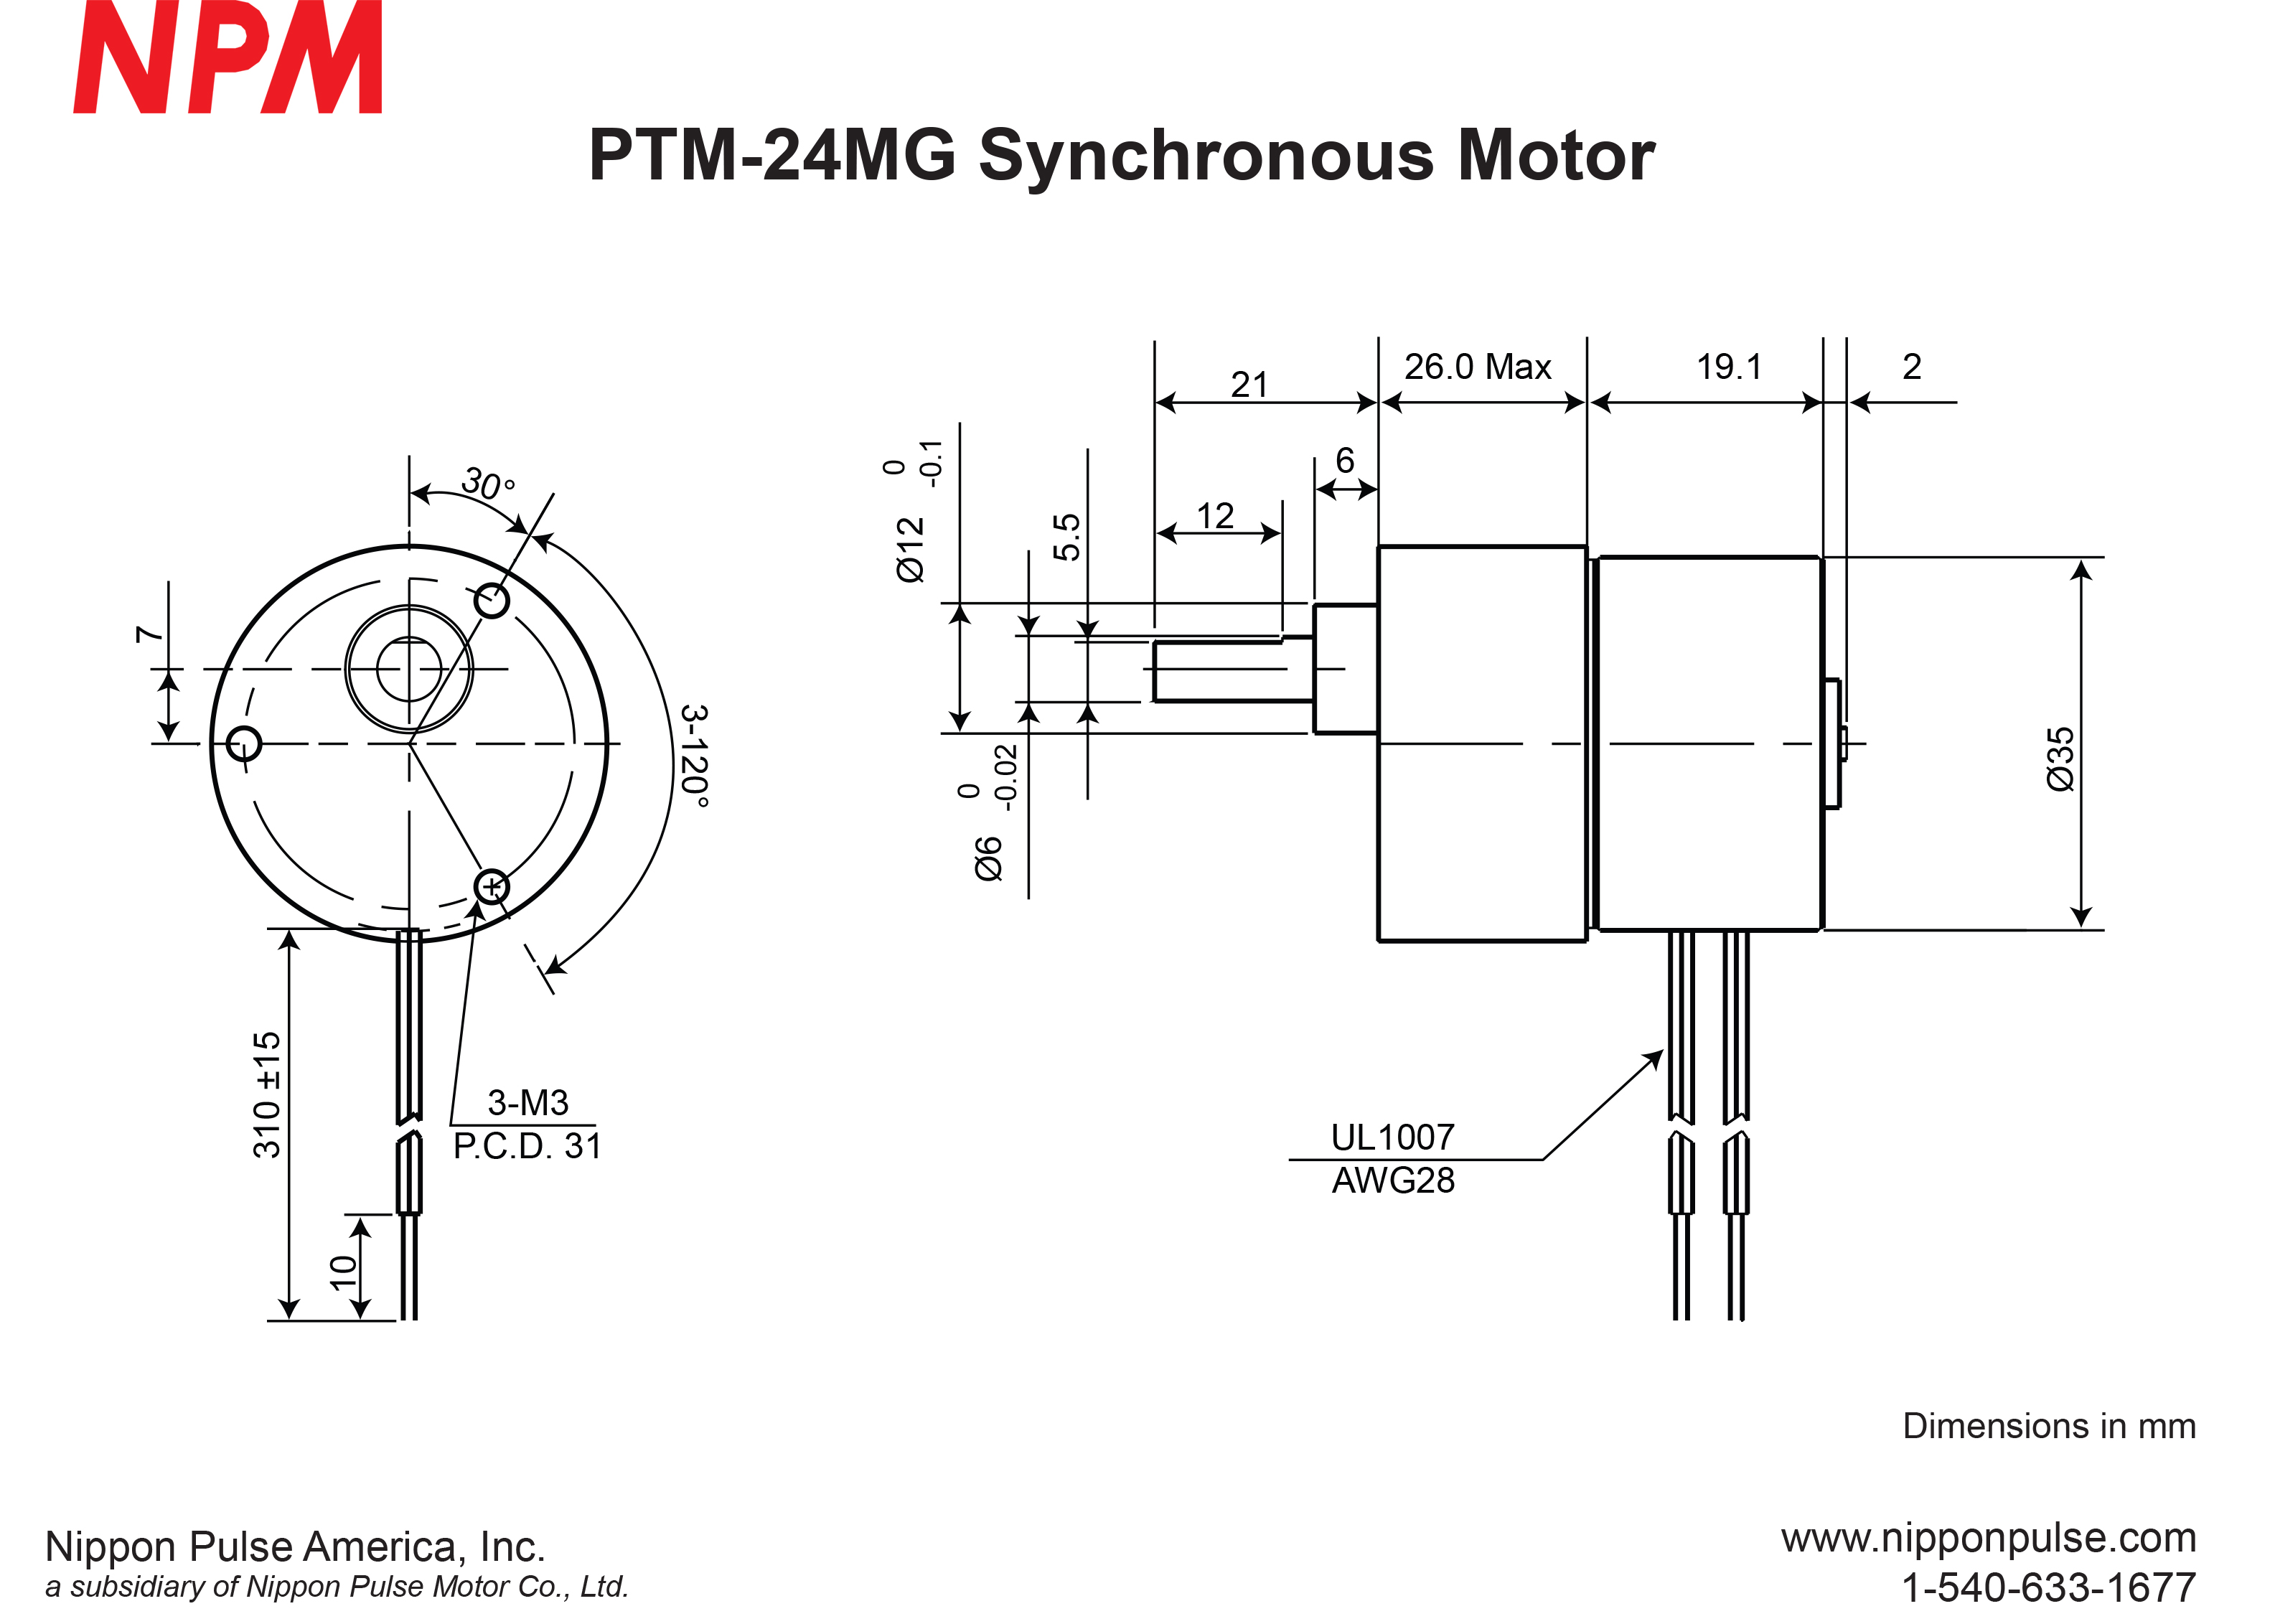 PTM-24MG(1/15) system drawing